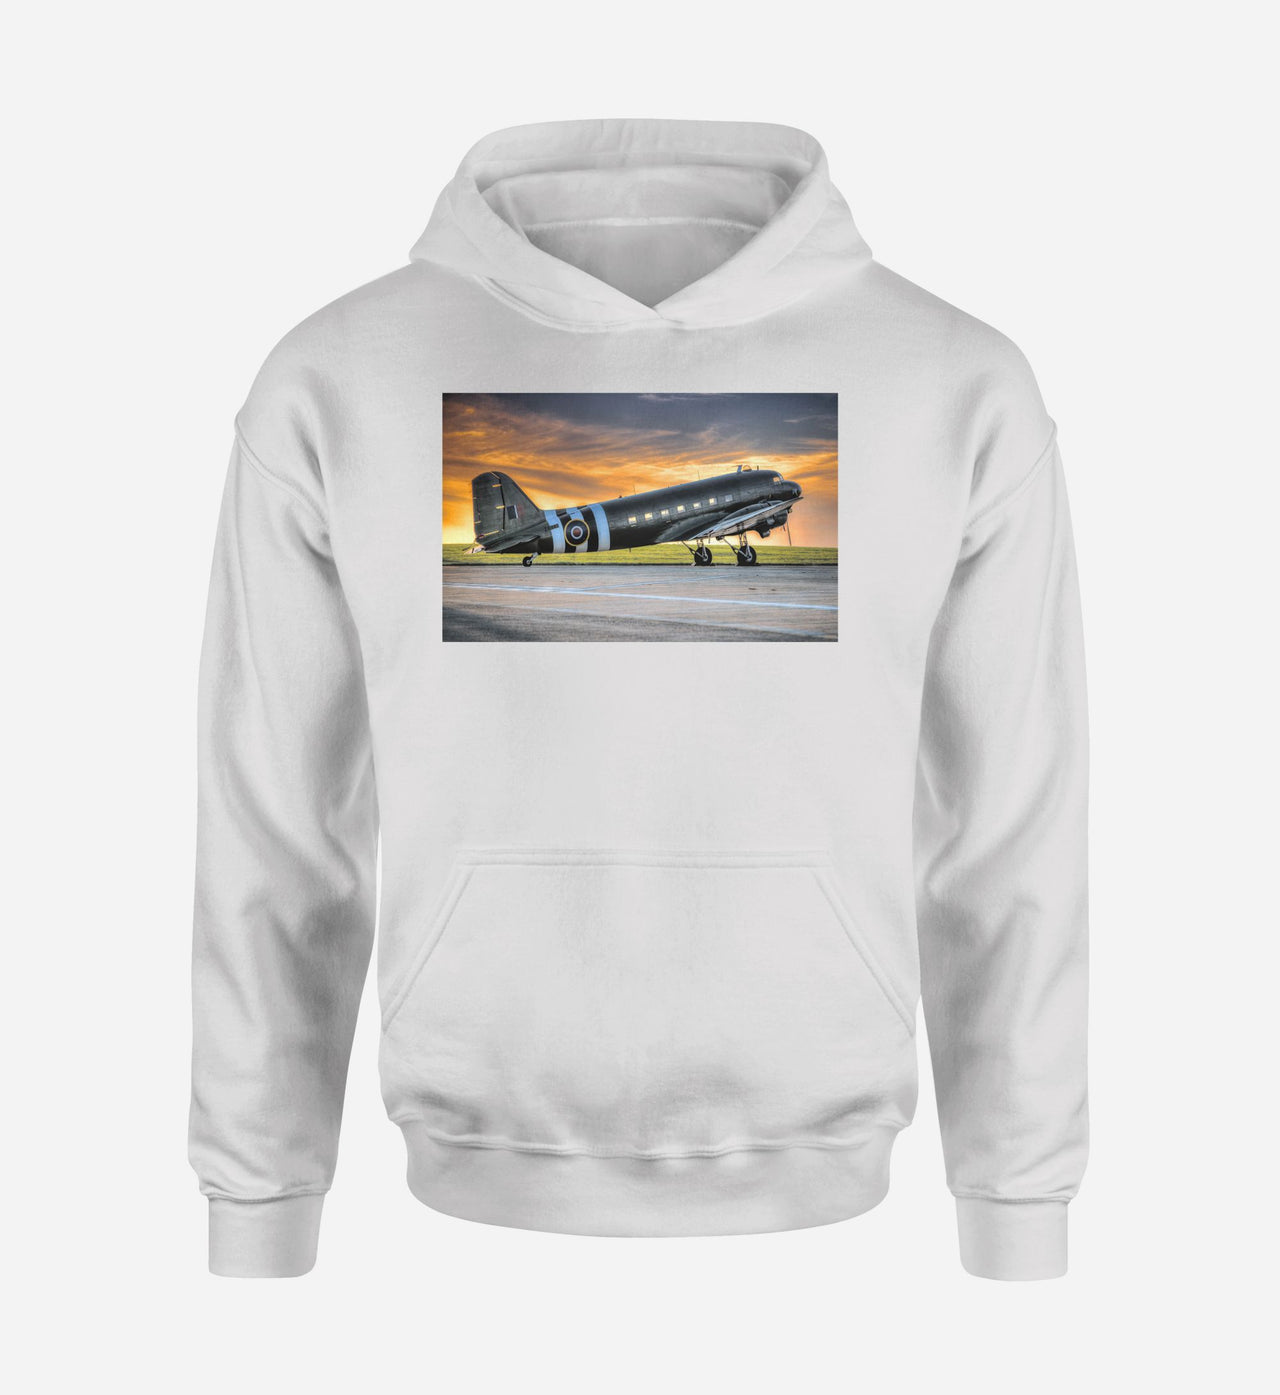 Old Airplane Parked During Sunset Designed Hoodies